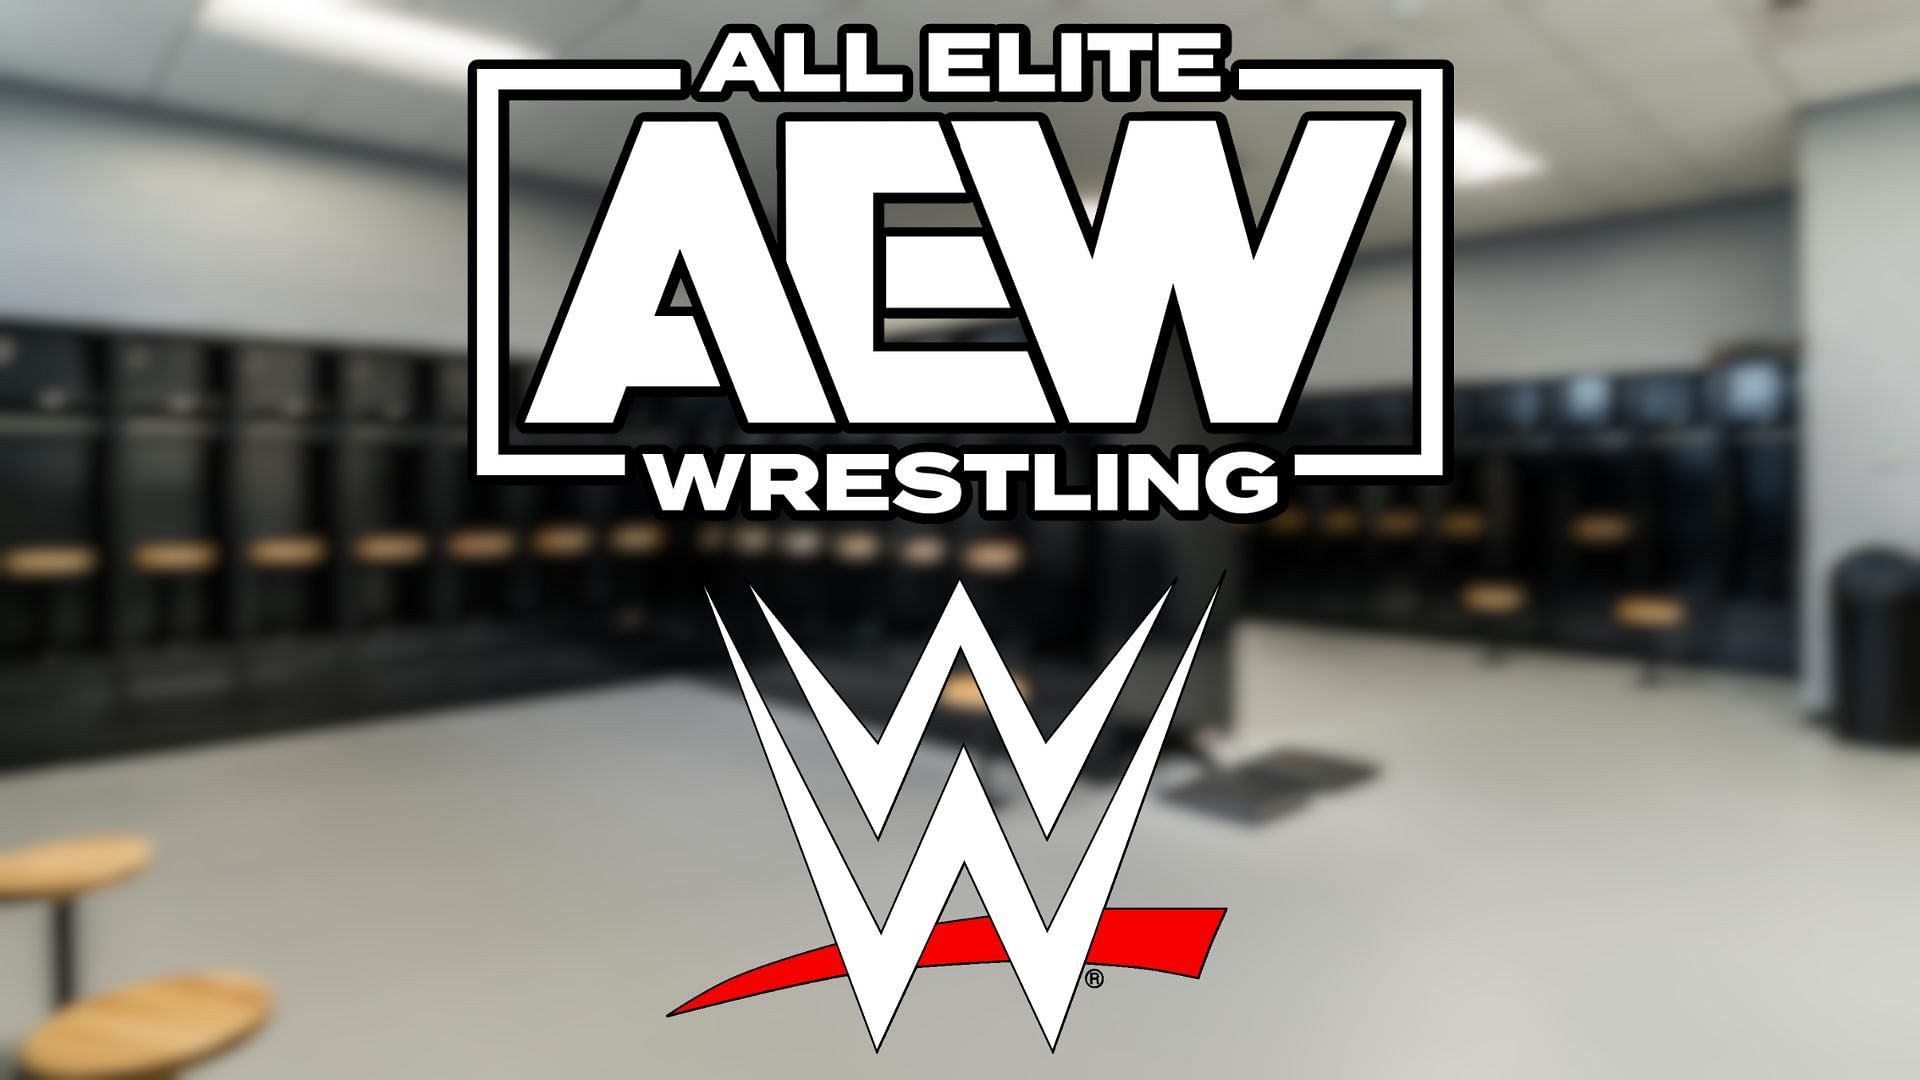 Should the AEW roster take note of what this WWE legend has to say?